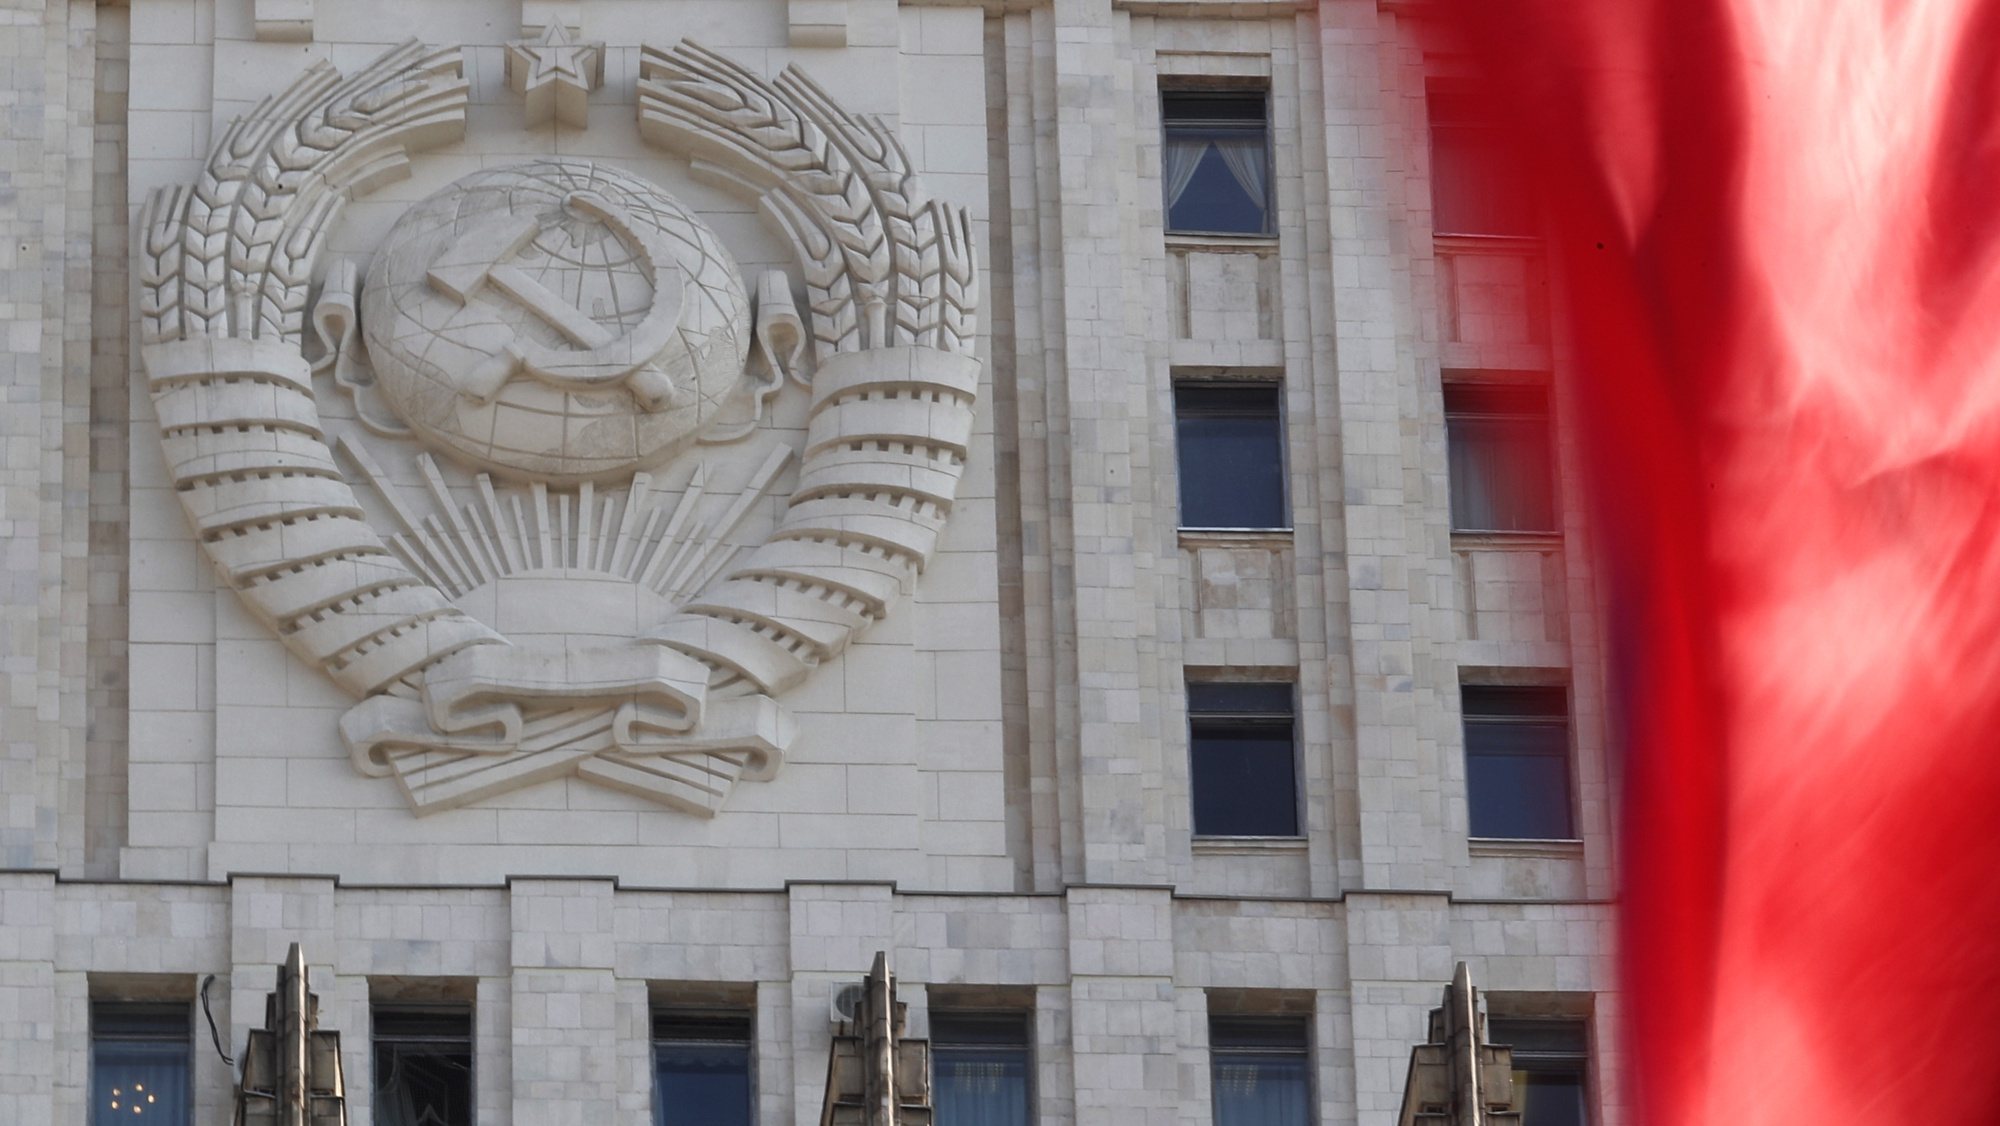 epa07002952 A view of Russian Foreign Ministry building in Moscow, Russia, 07 September 2018. As media reported, the Russian Foreign Ministry spokesperson Maria Zakharova said at a press briefing on 07 September 2018, the United States and the United Kingdom are the principal beneficiaries of the Salisbury incident. The former Russian spy Sergei Skripal aged 66 and his daughter Yulia, aged 33, were found suffering from extreme exposure to a rare nerve agent in Salisbury southern England, on 04 March 2018.  EPA/MAXIM SHIPENKOV